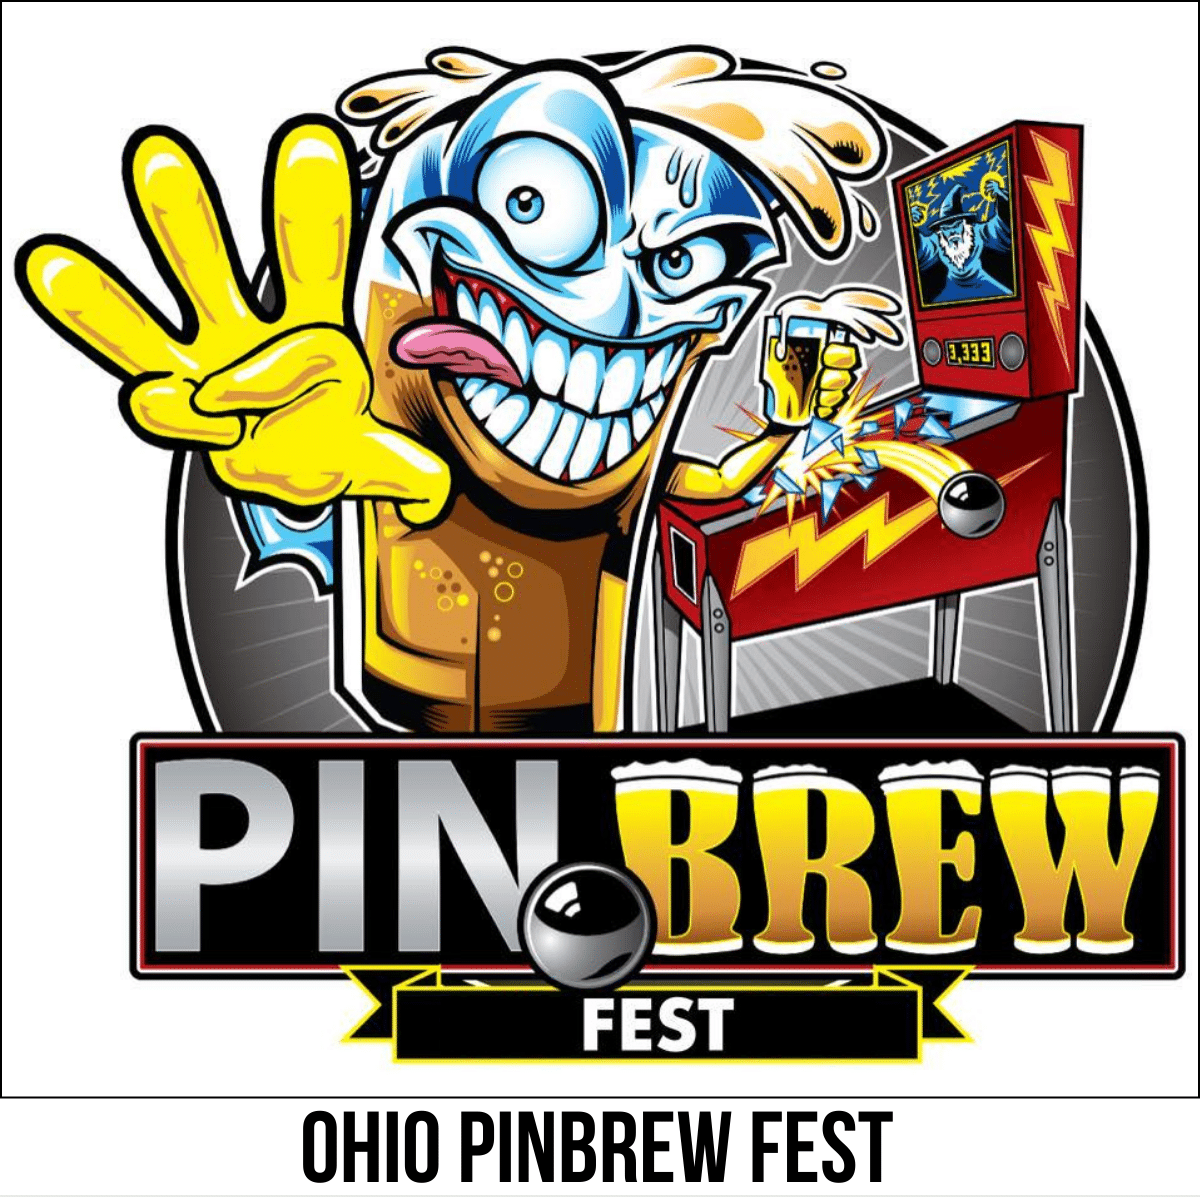 A square image of a photo of a personified beer mug holding a beer in one hand and holding three fingers up on the other hand. A pinball machine is in the background. The photo has text PinBrew fest. A white strip across the bottom has text Ohio PinBrew Fest